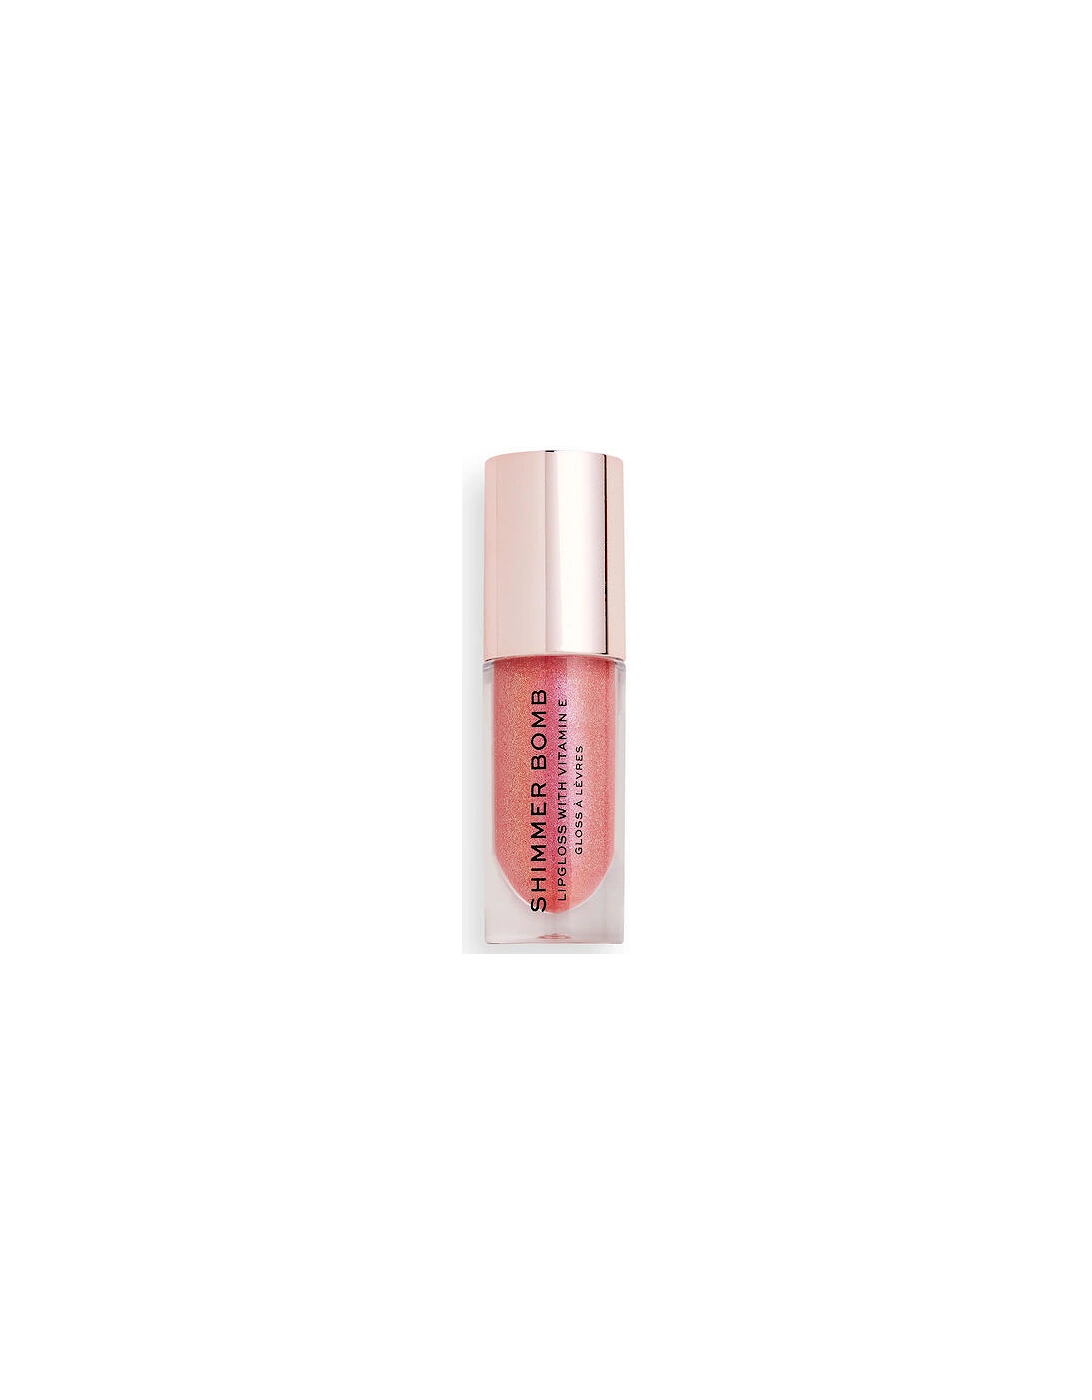 Shimmer Bomb Daydream Pink, 2 of 1